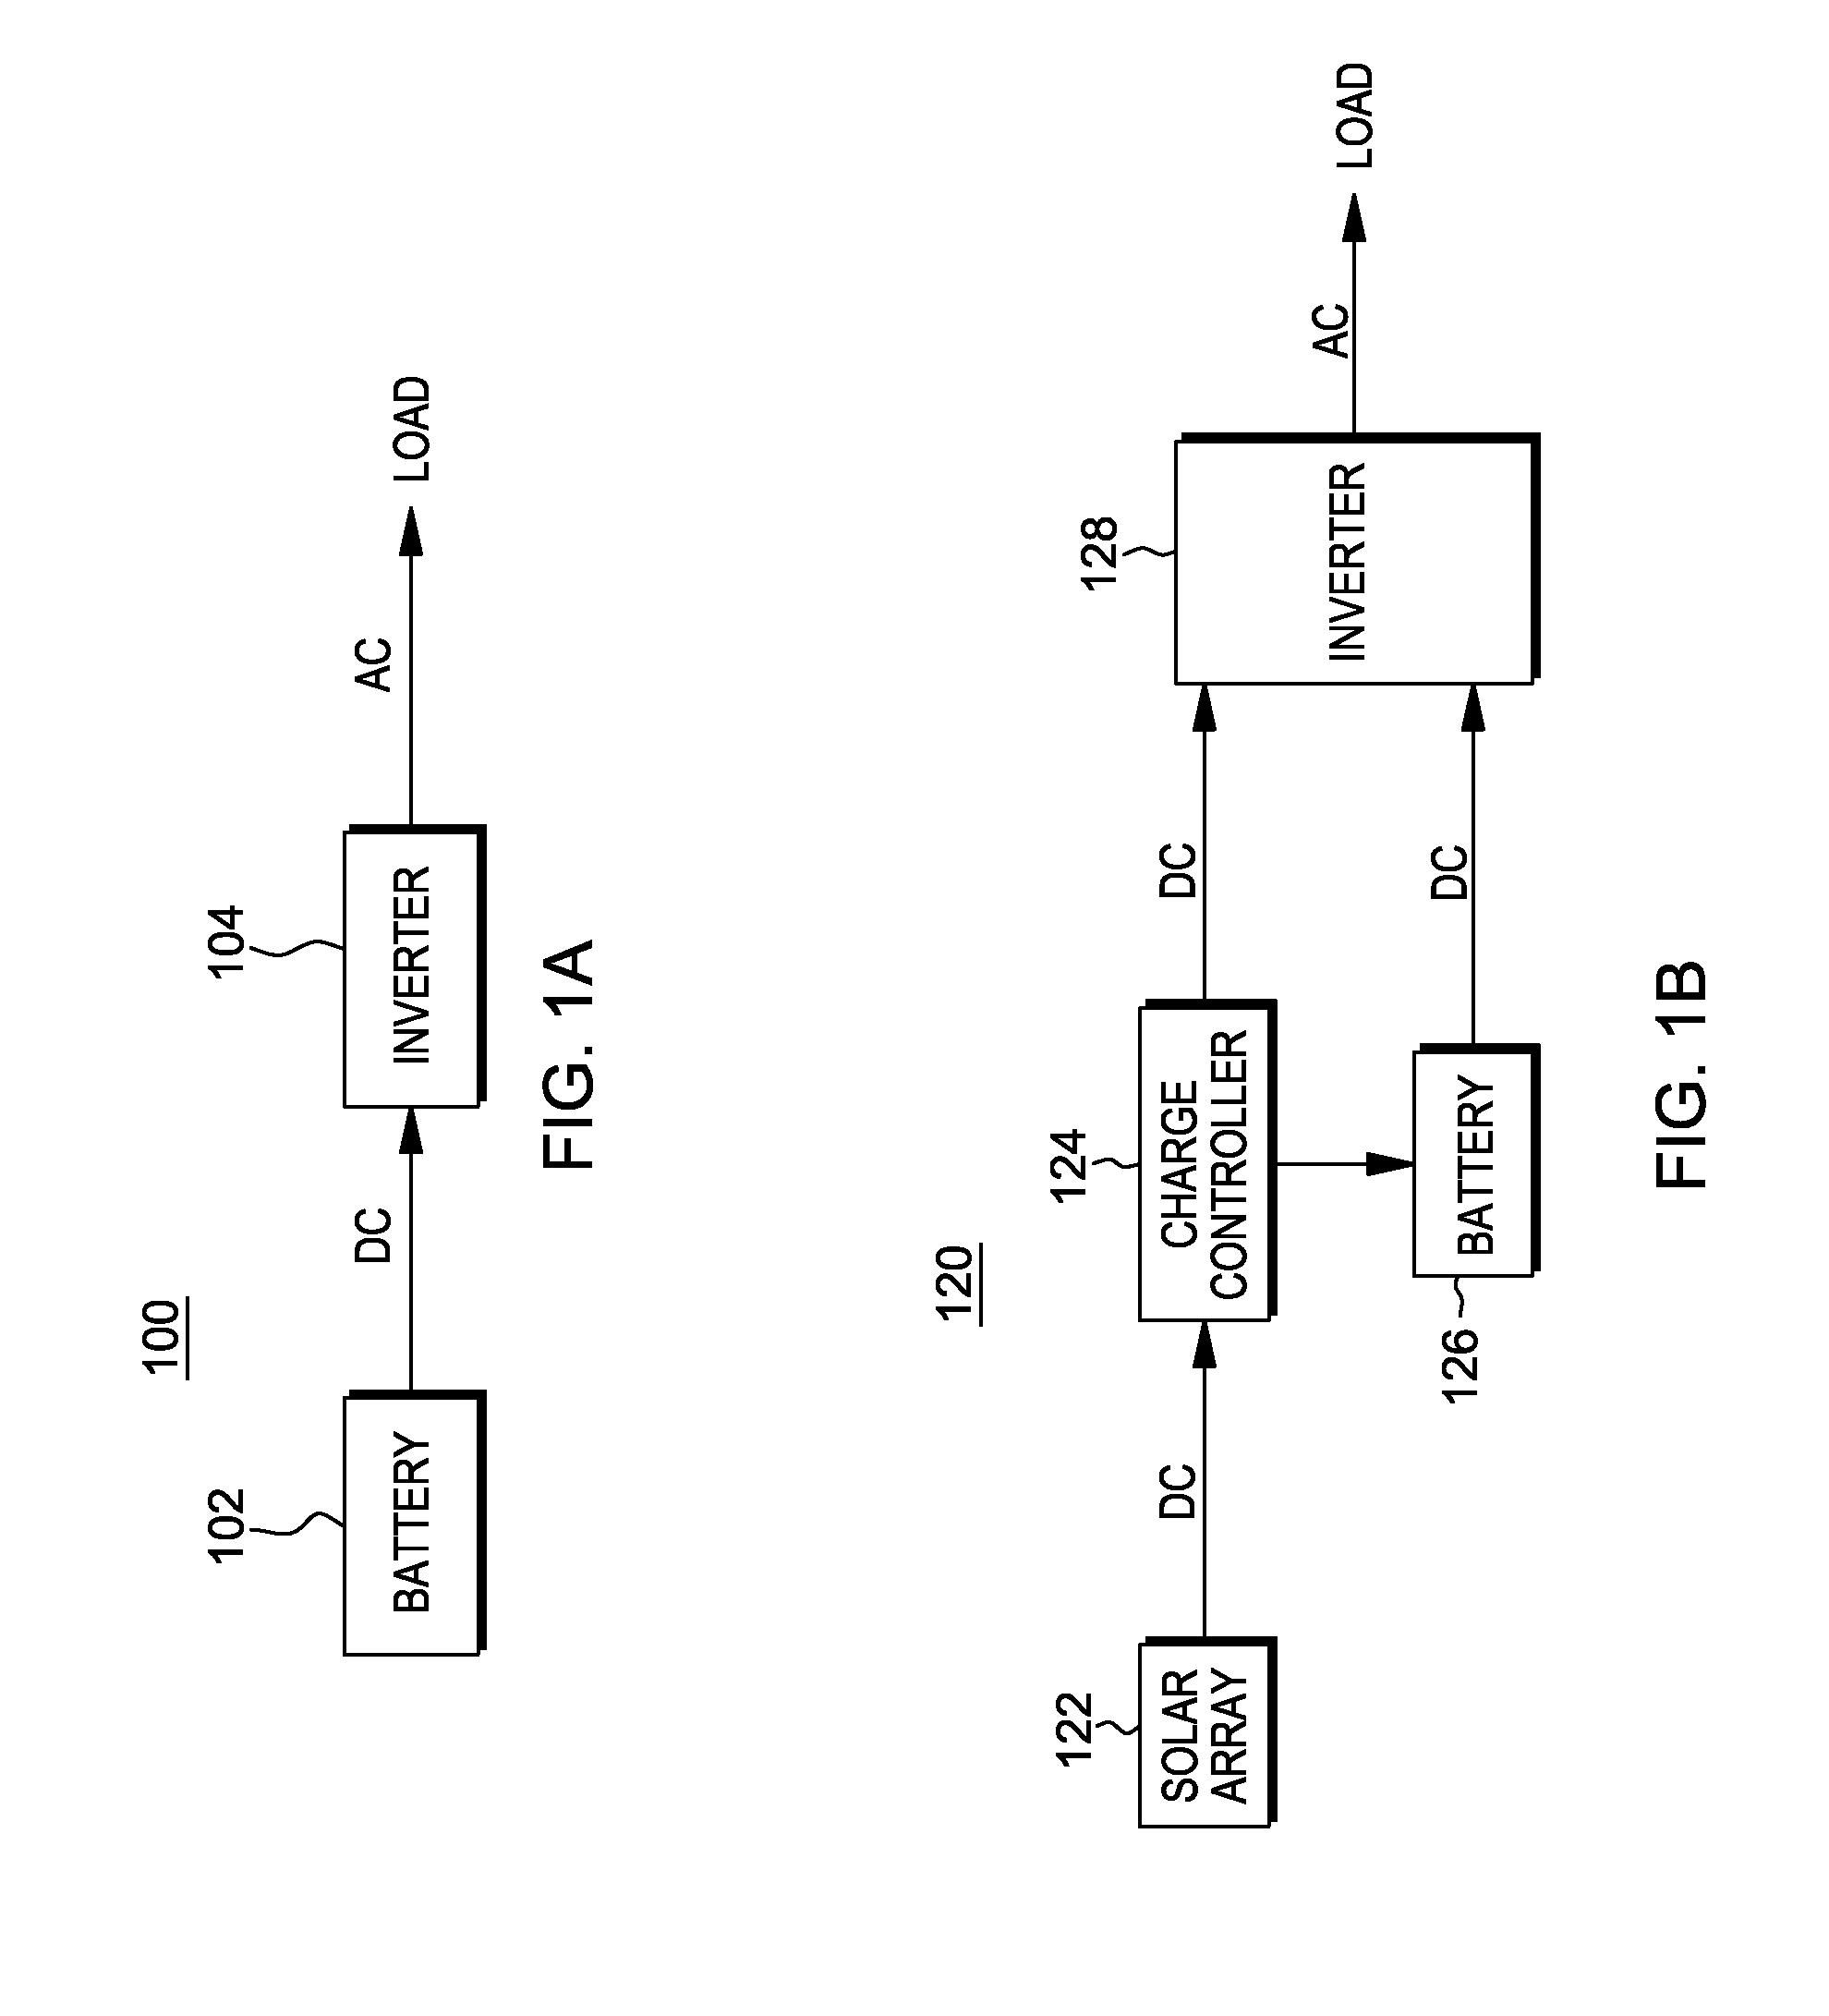 Method, system and apparatus for redirecting use of any inverter or uninterruptable power supply with improved solar power management